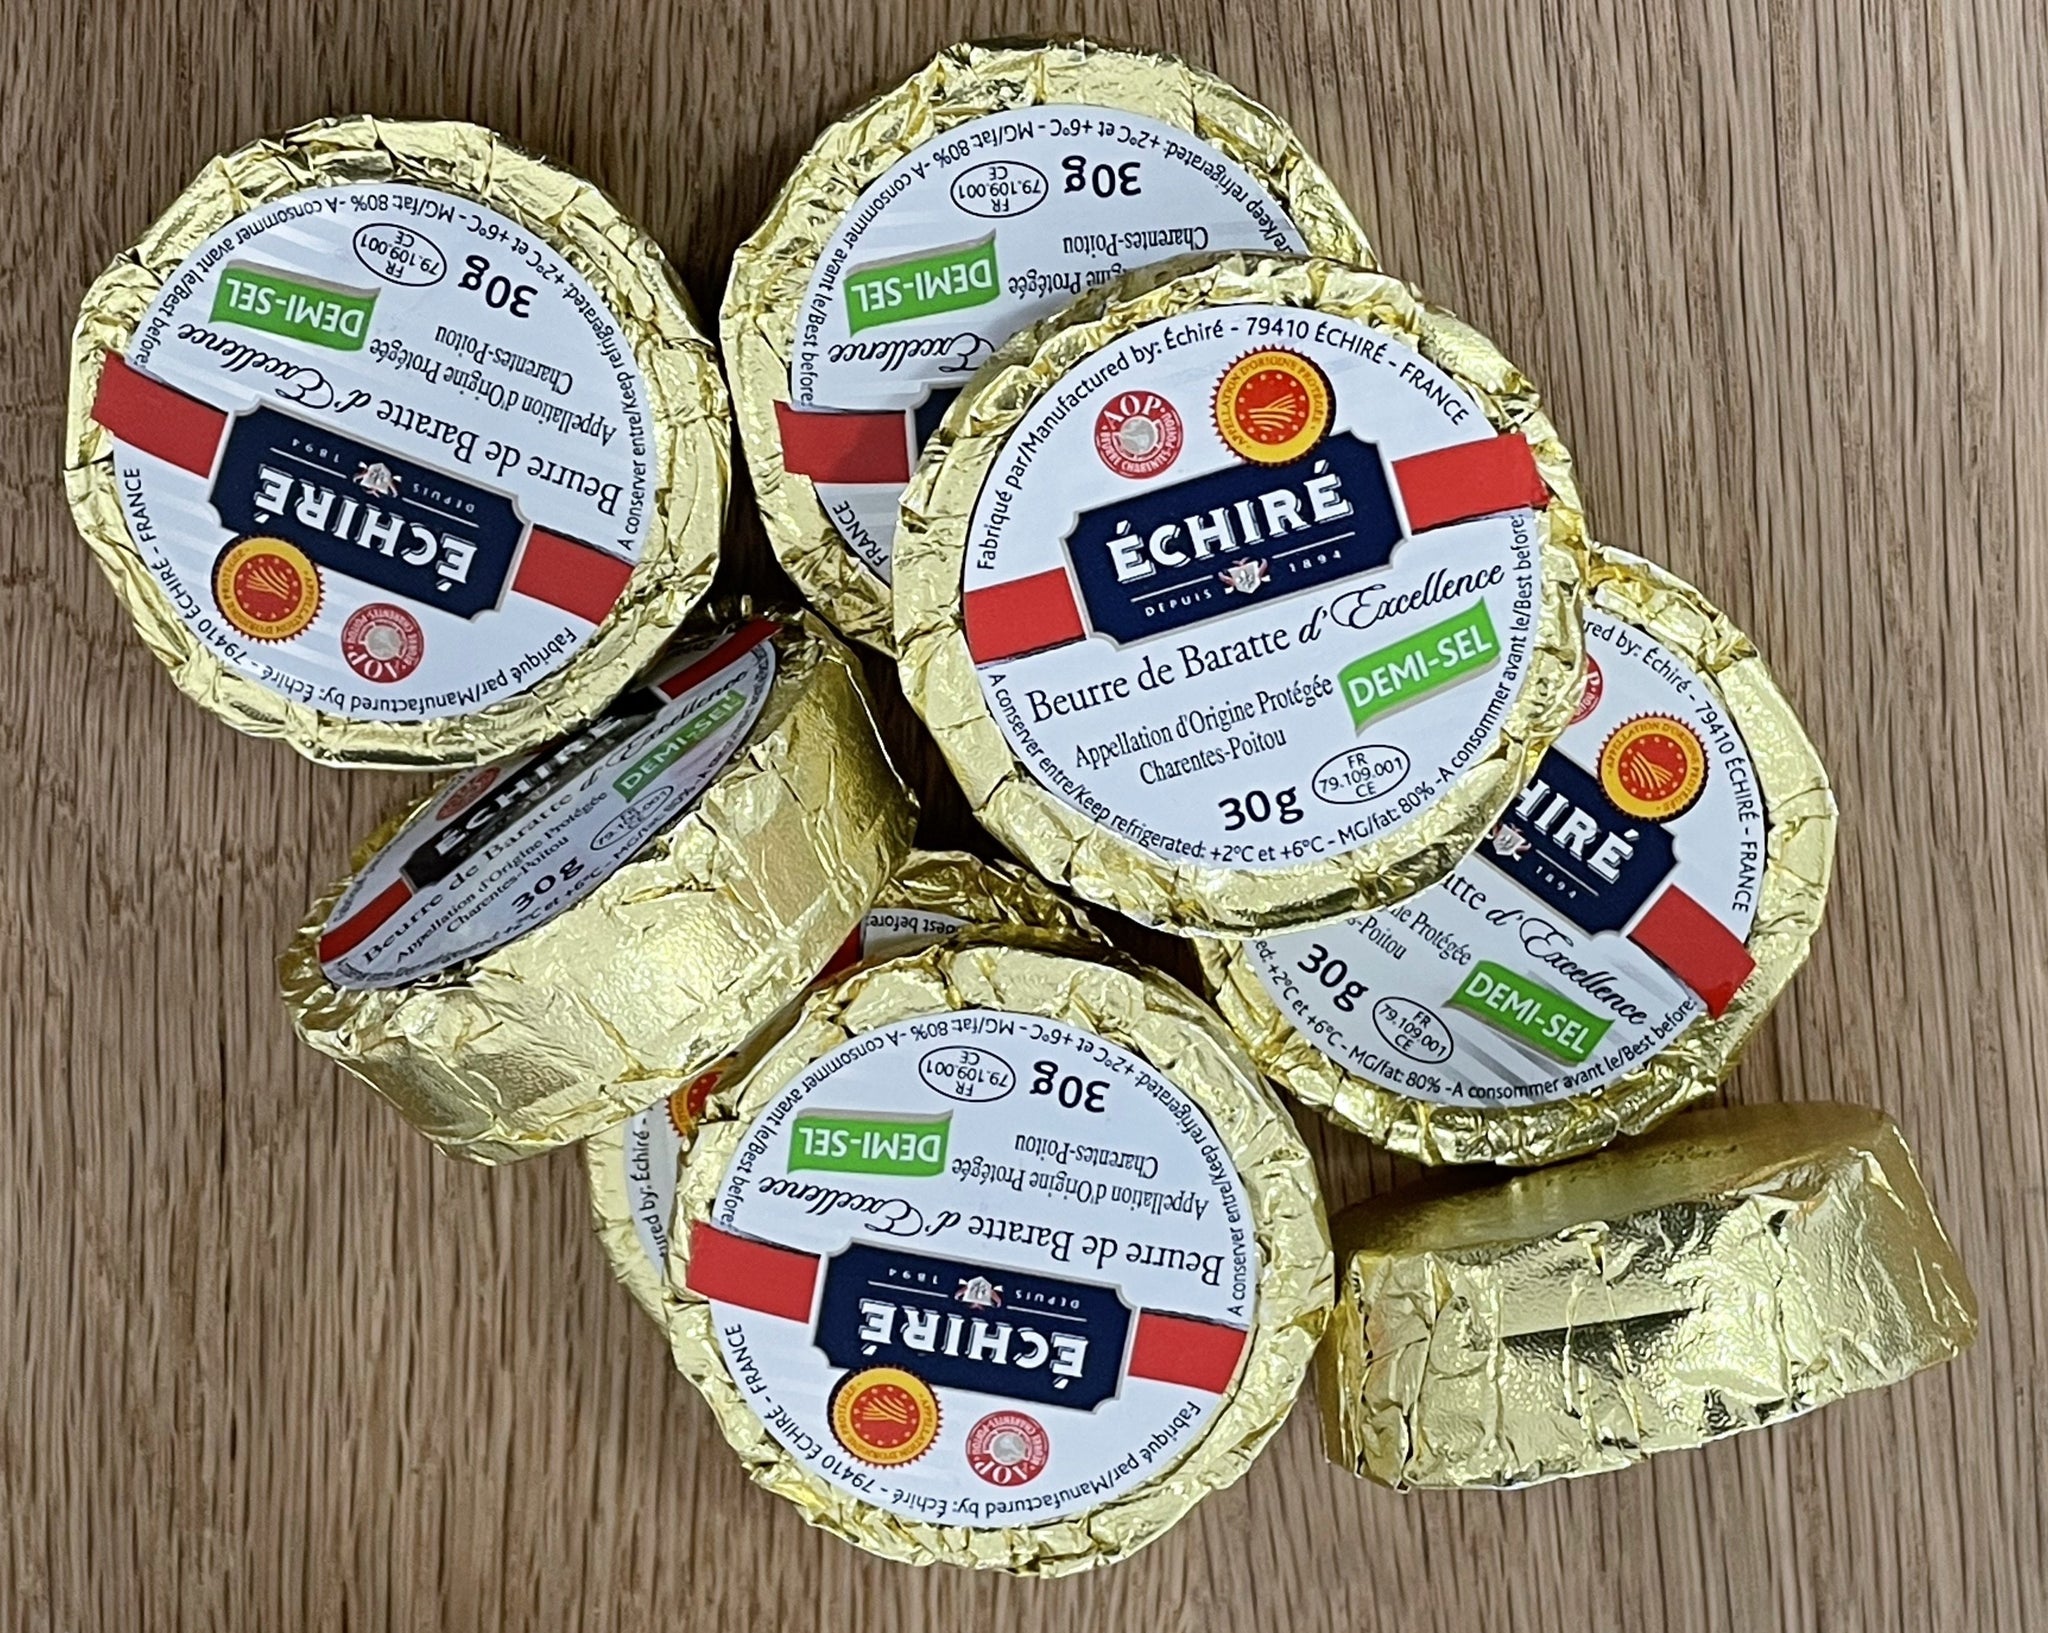 Echire Salted Butter Cup 30g